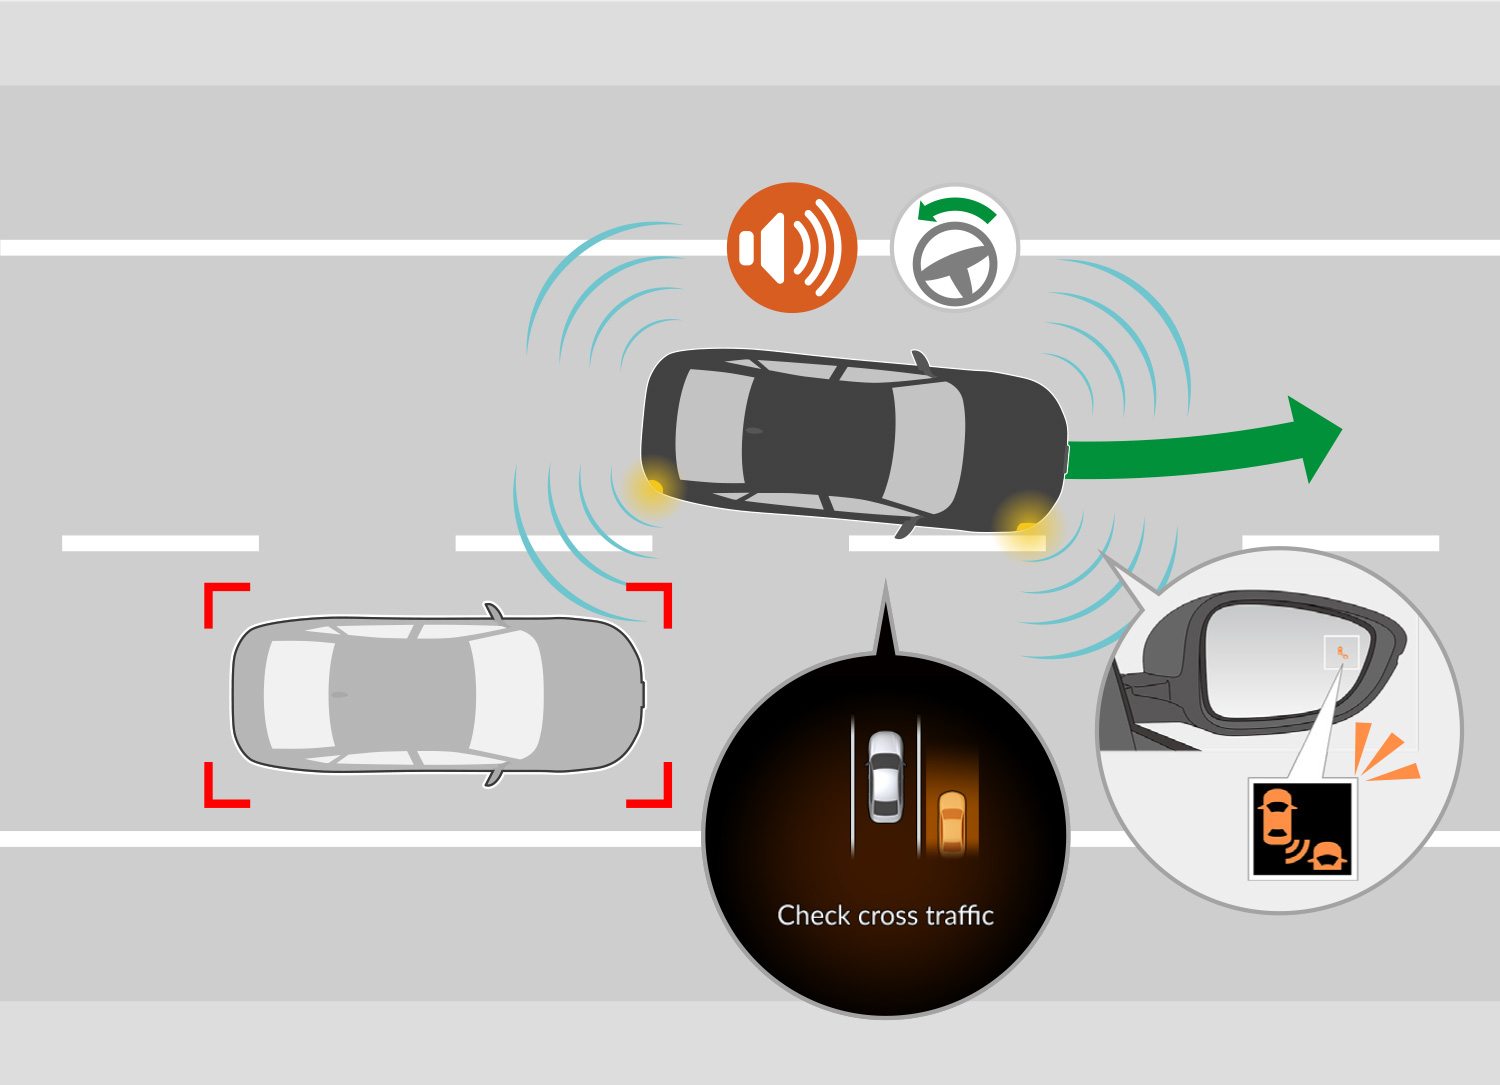 The system alerts the driver and assists steering to prompt the driver to abandon the lane change.